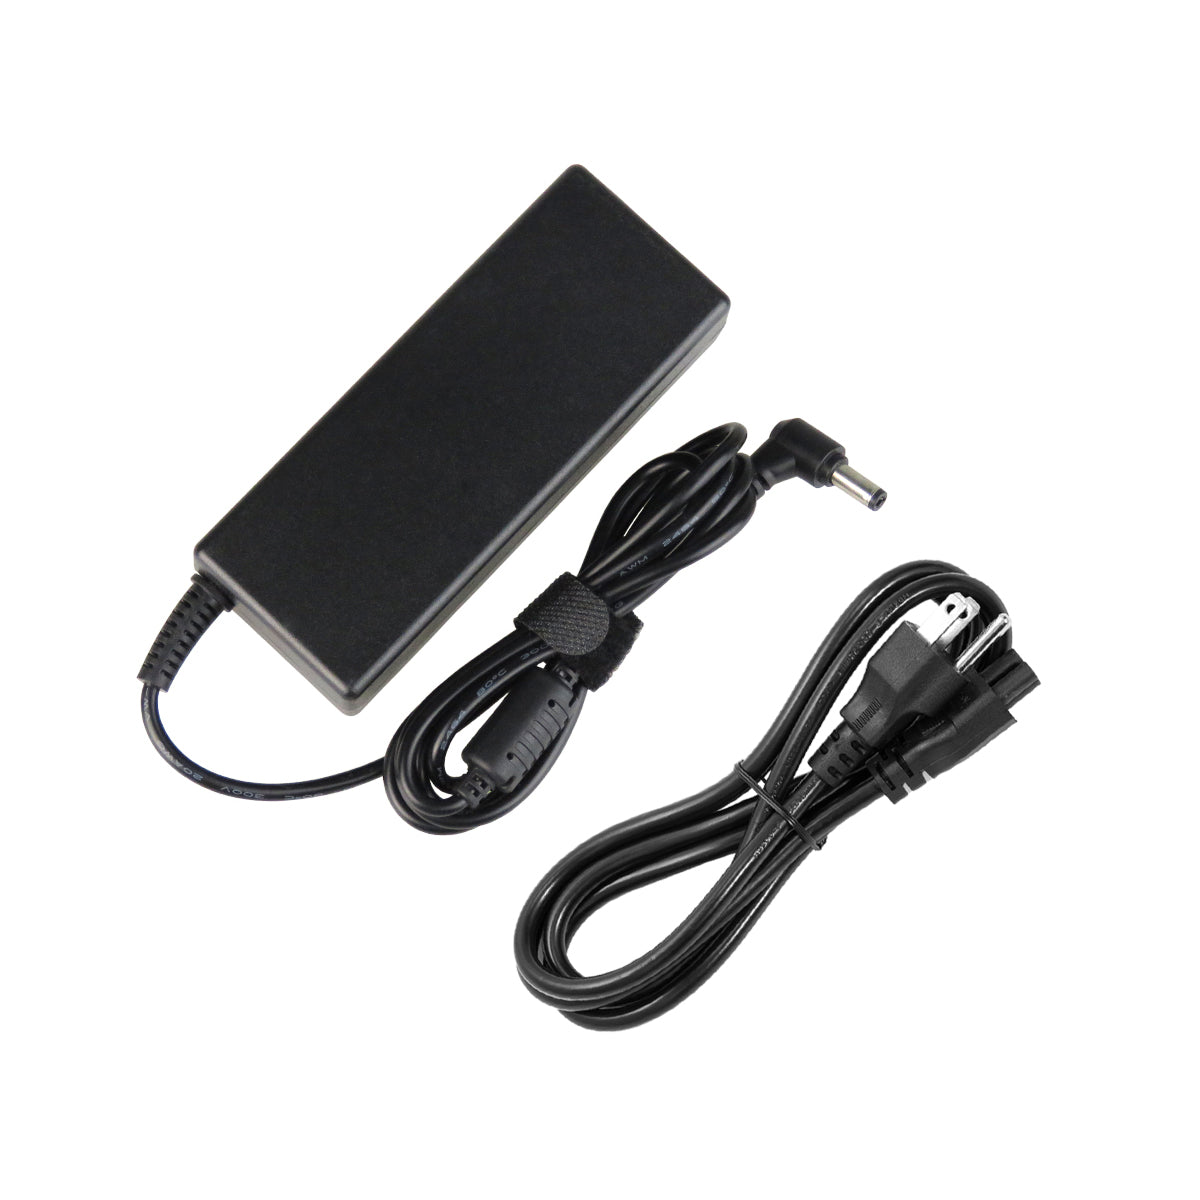 AC Adapter Charger for ASUS P43E Notebook.